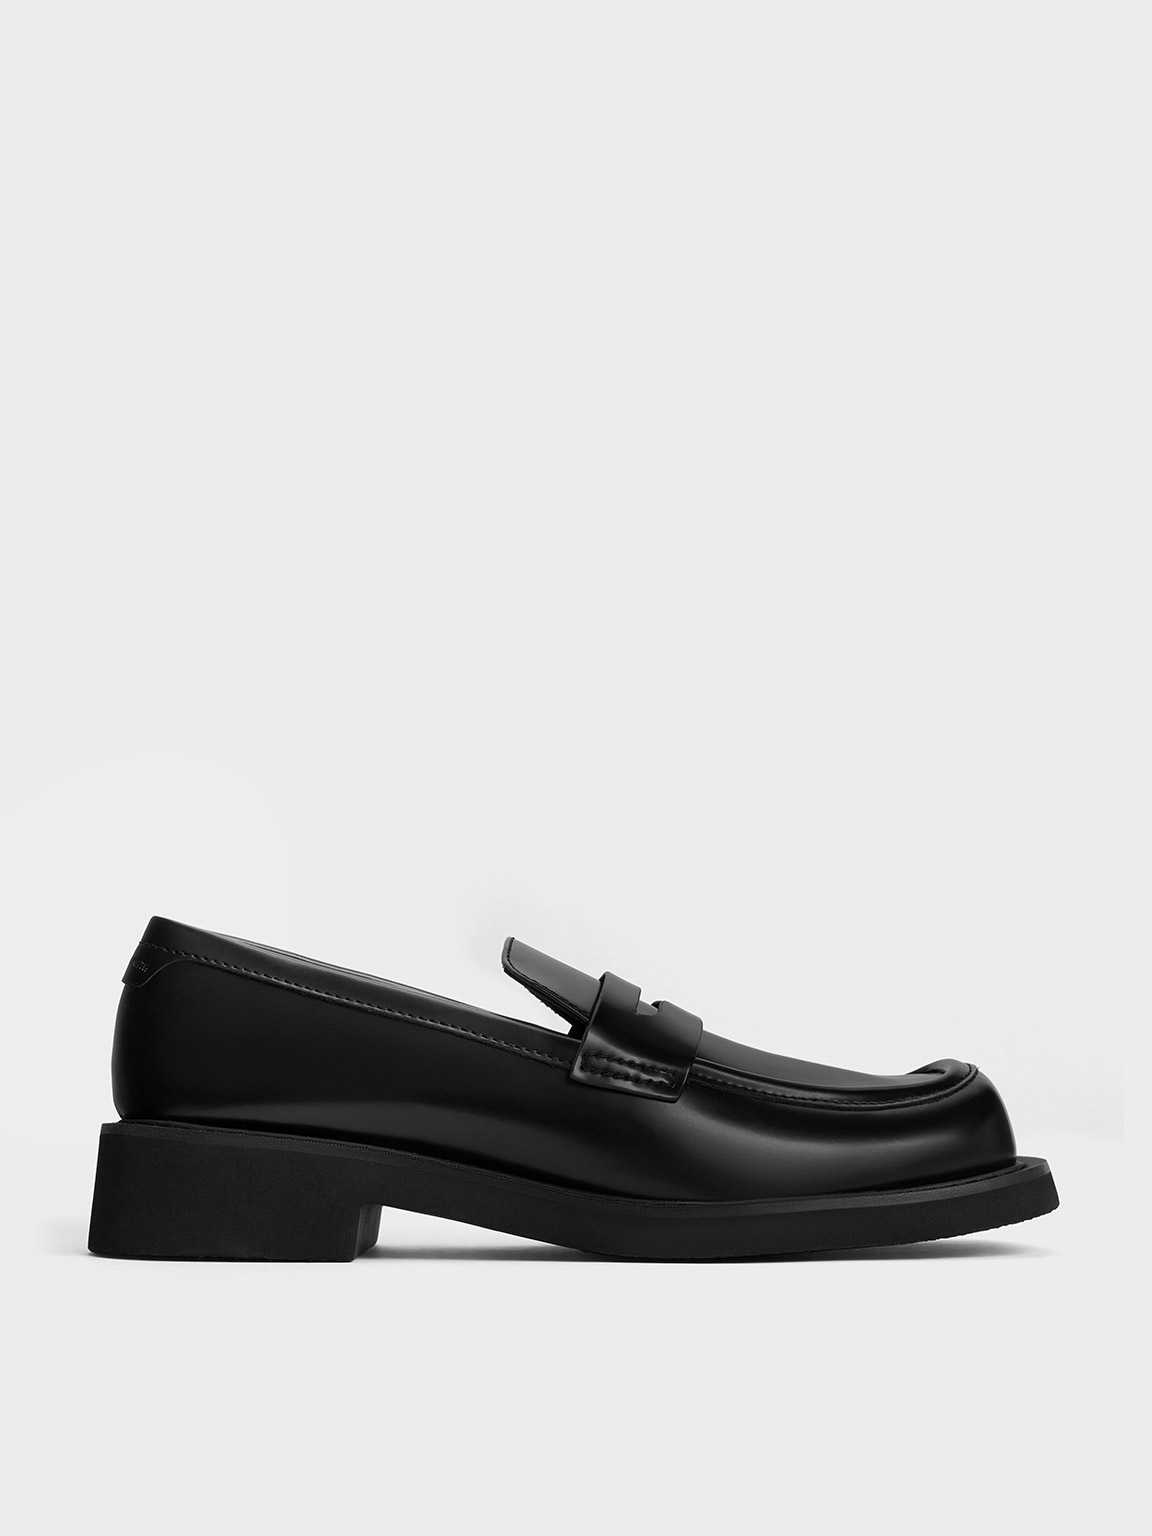 Charles & Keith Monique Square-toe Loafers In Black Box